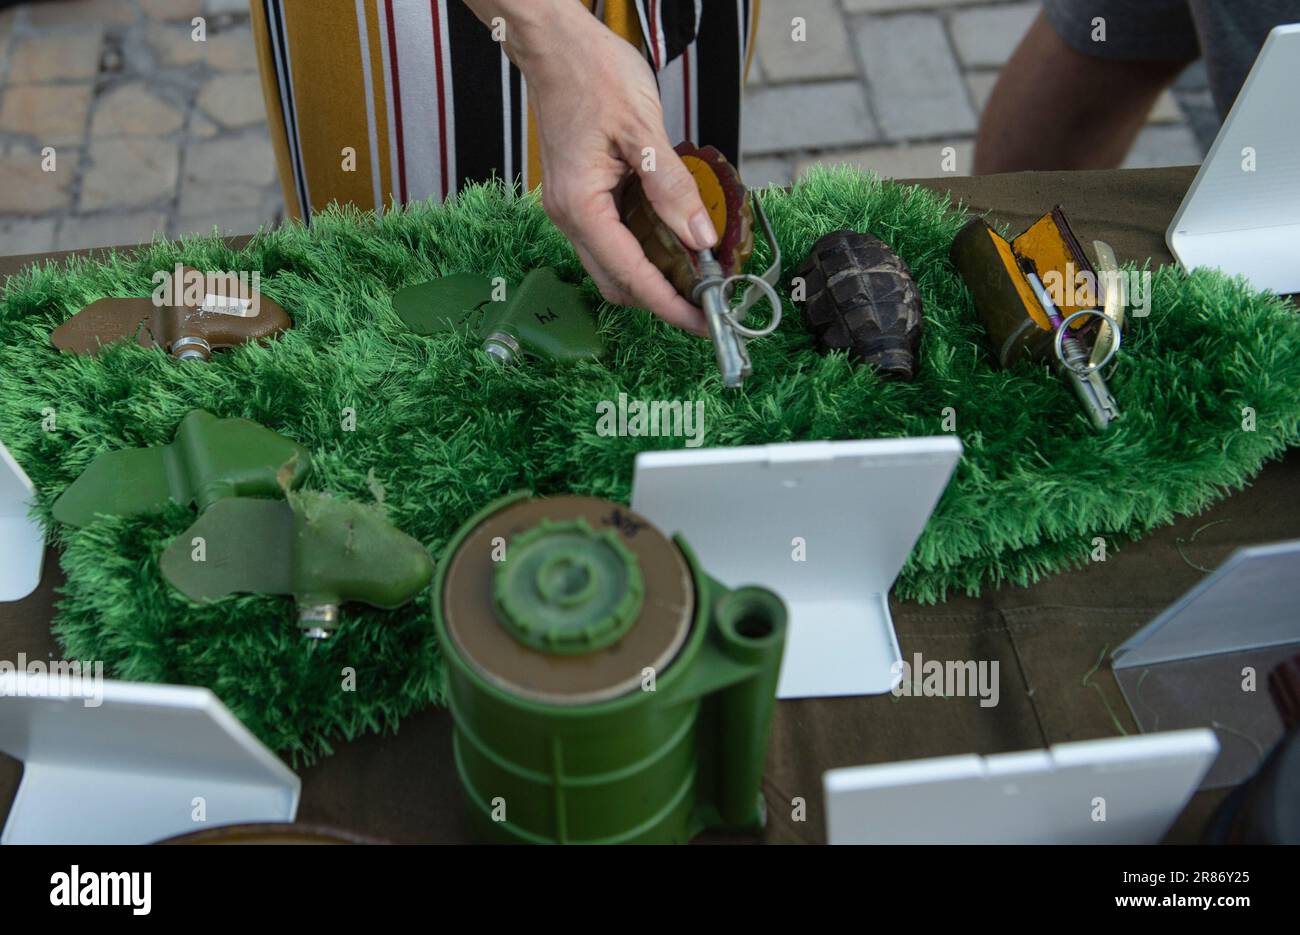 Kyiv, Ukraine. 18th June, 2023. Kyiv residents handle de-activated hand-grenades and landmines during an exhibition of Russian weaponry and equipment in Mykhailivska Square in Kyiv. Recovered Russian military equipment was put on display for residents of Kyiv to come and observe in Mykhailivska Square in Kyiv, Ukraine. The military hardware was collected from various battle fields in Ukraine by the National Museum of the Military History of Ukraine. Credit: SOPA Images Limited/Alamy Live News Stock Photo